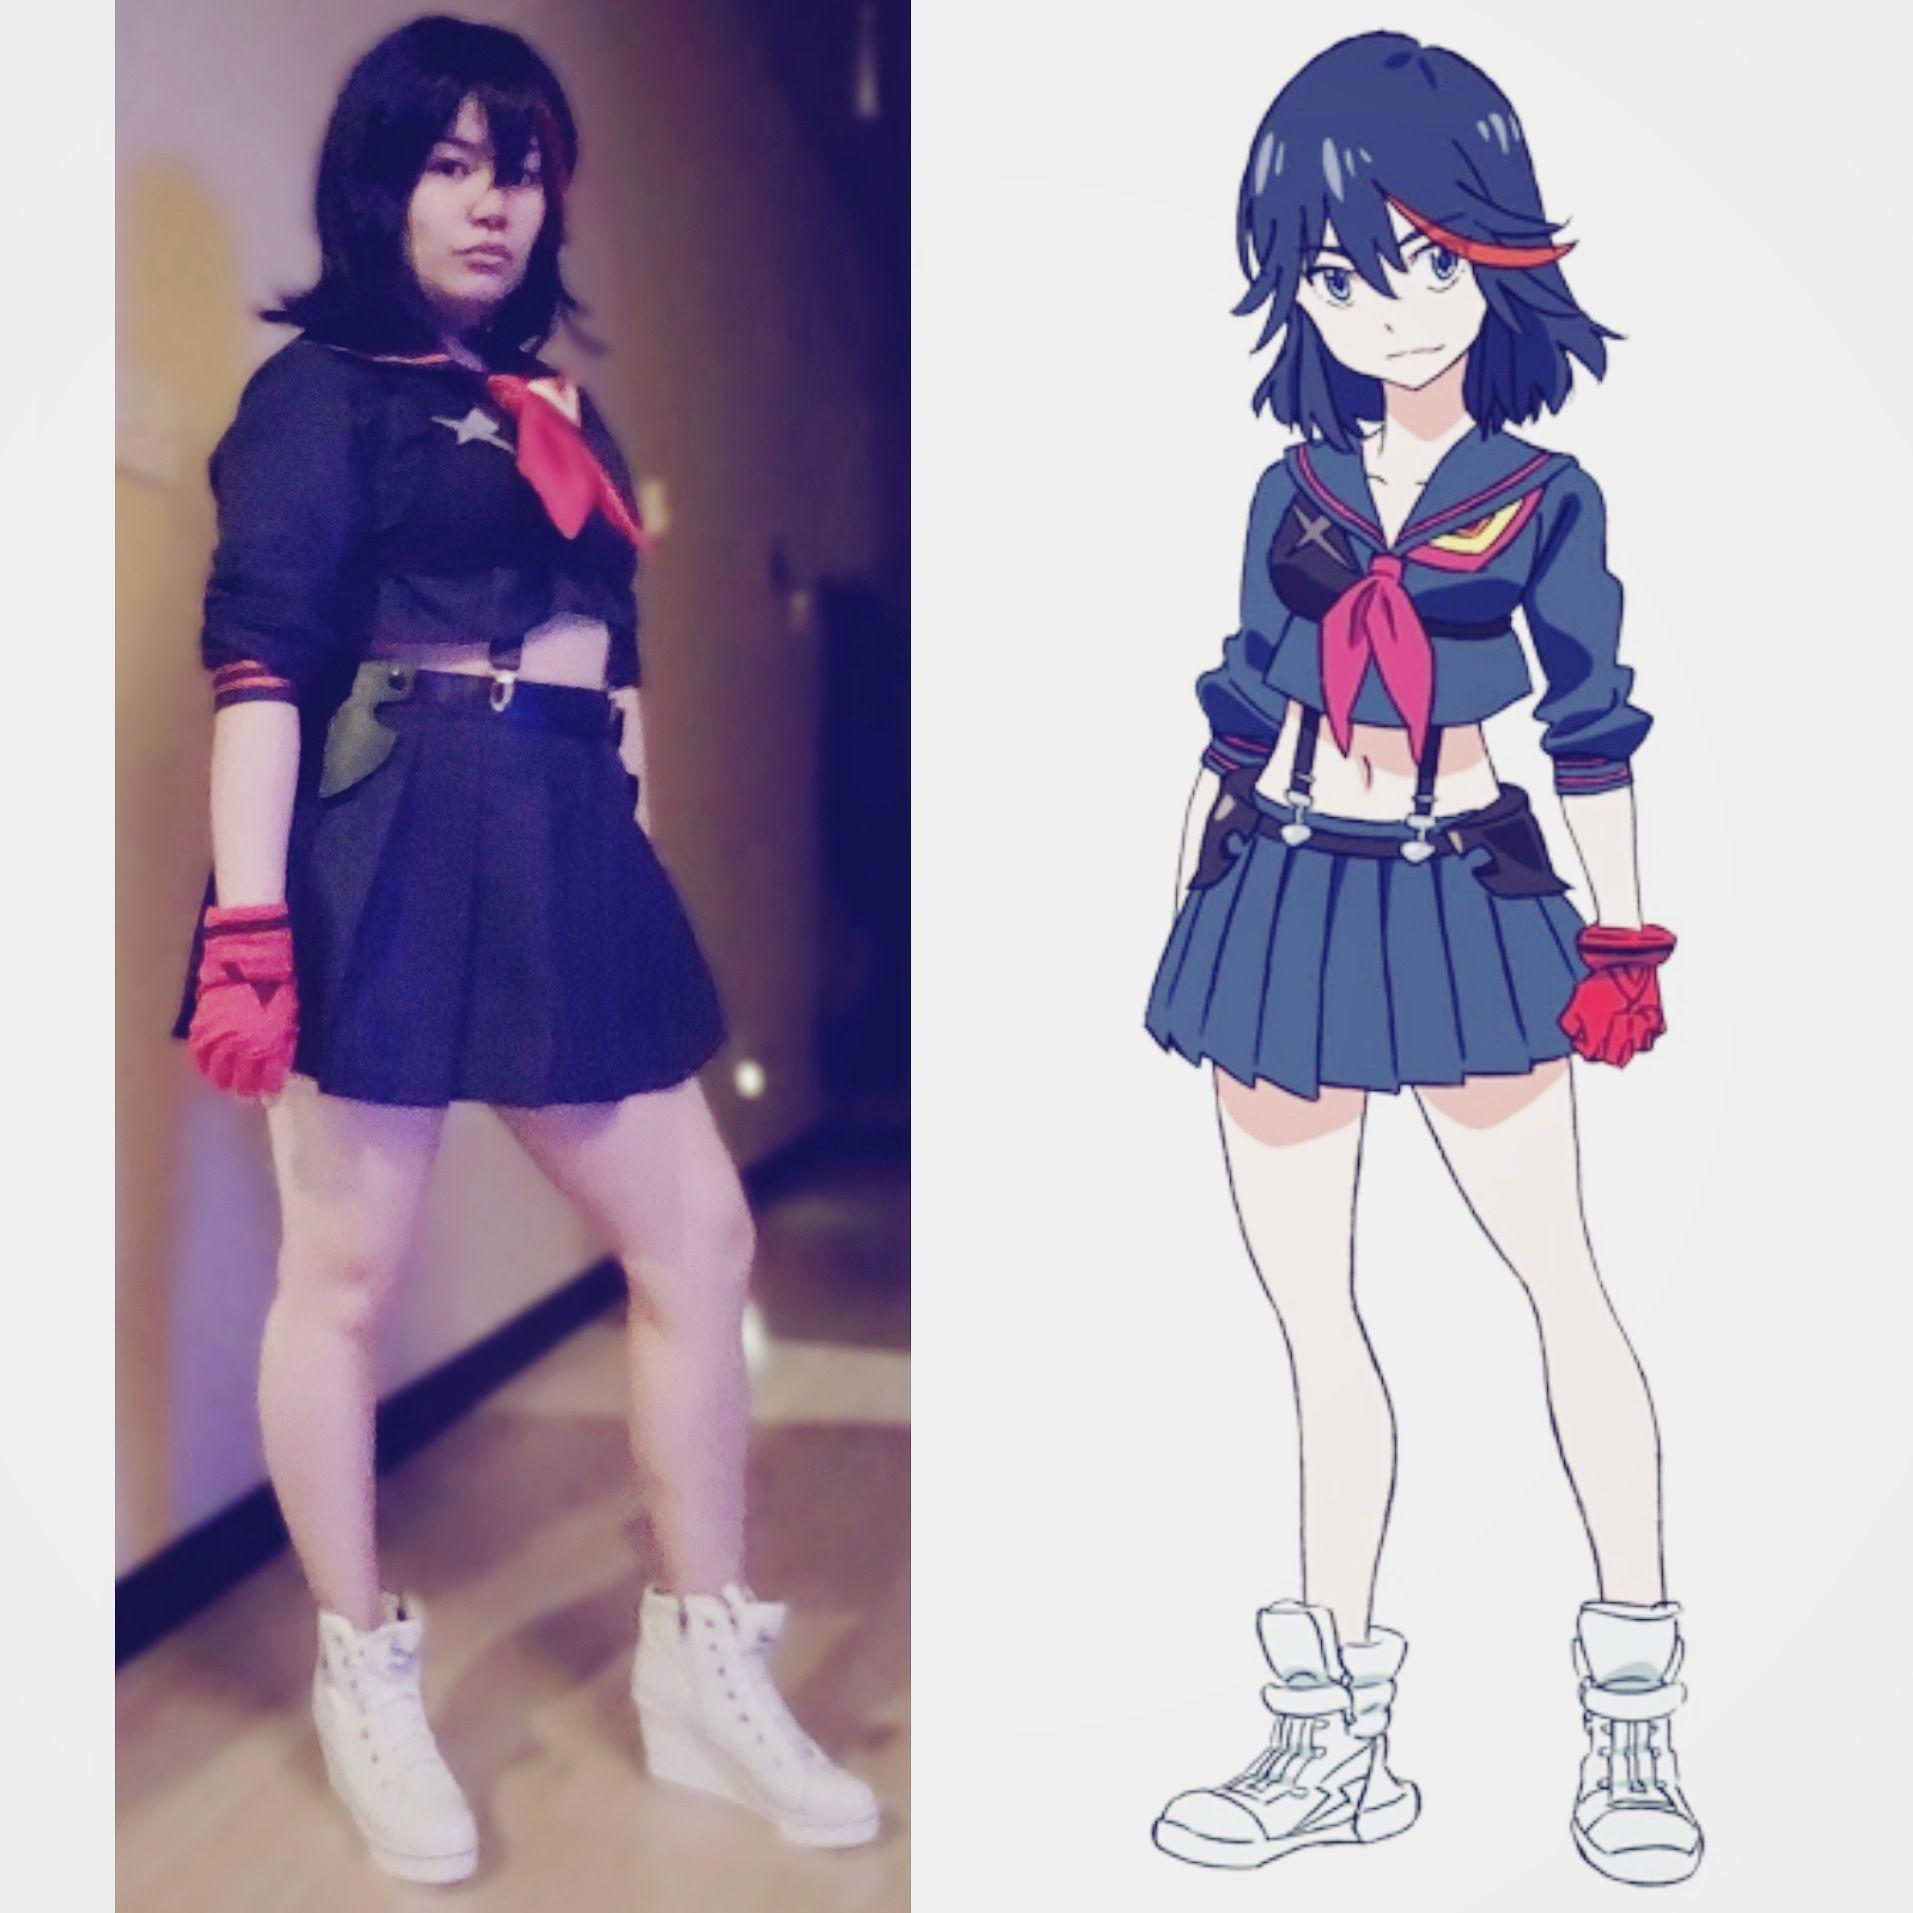 dean dumont recommends kill la kill cosplay outfit pic